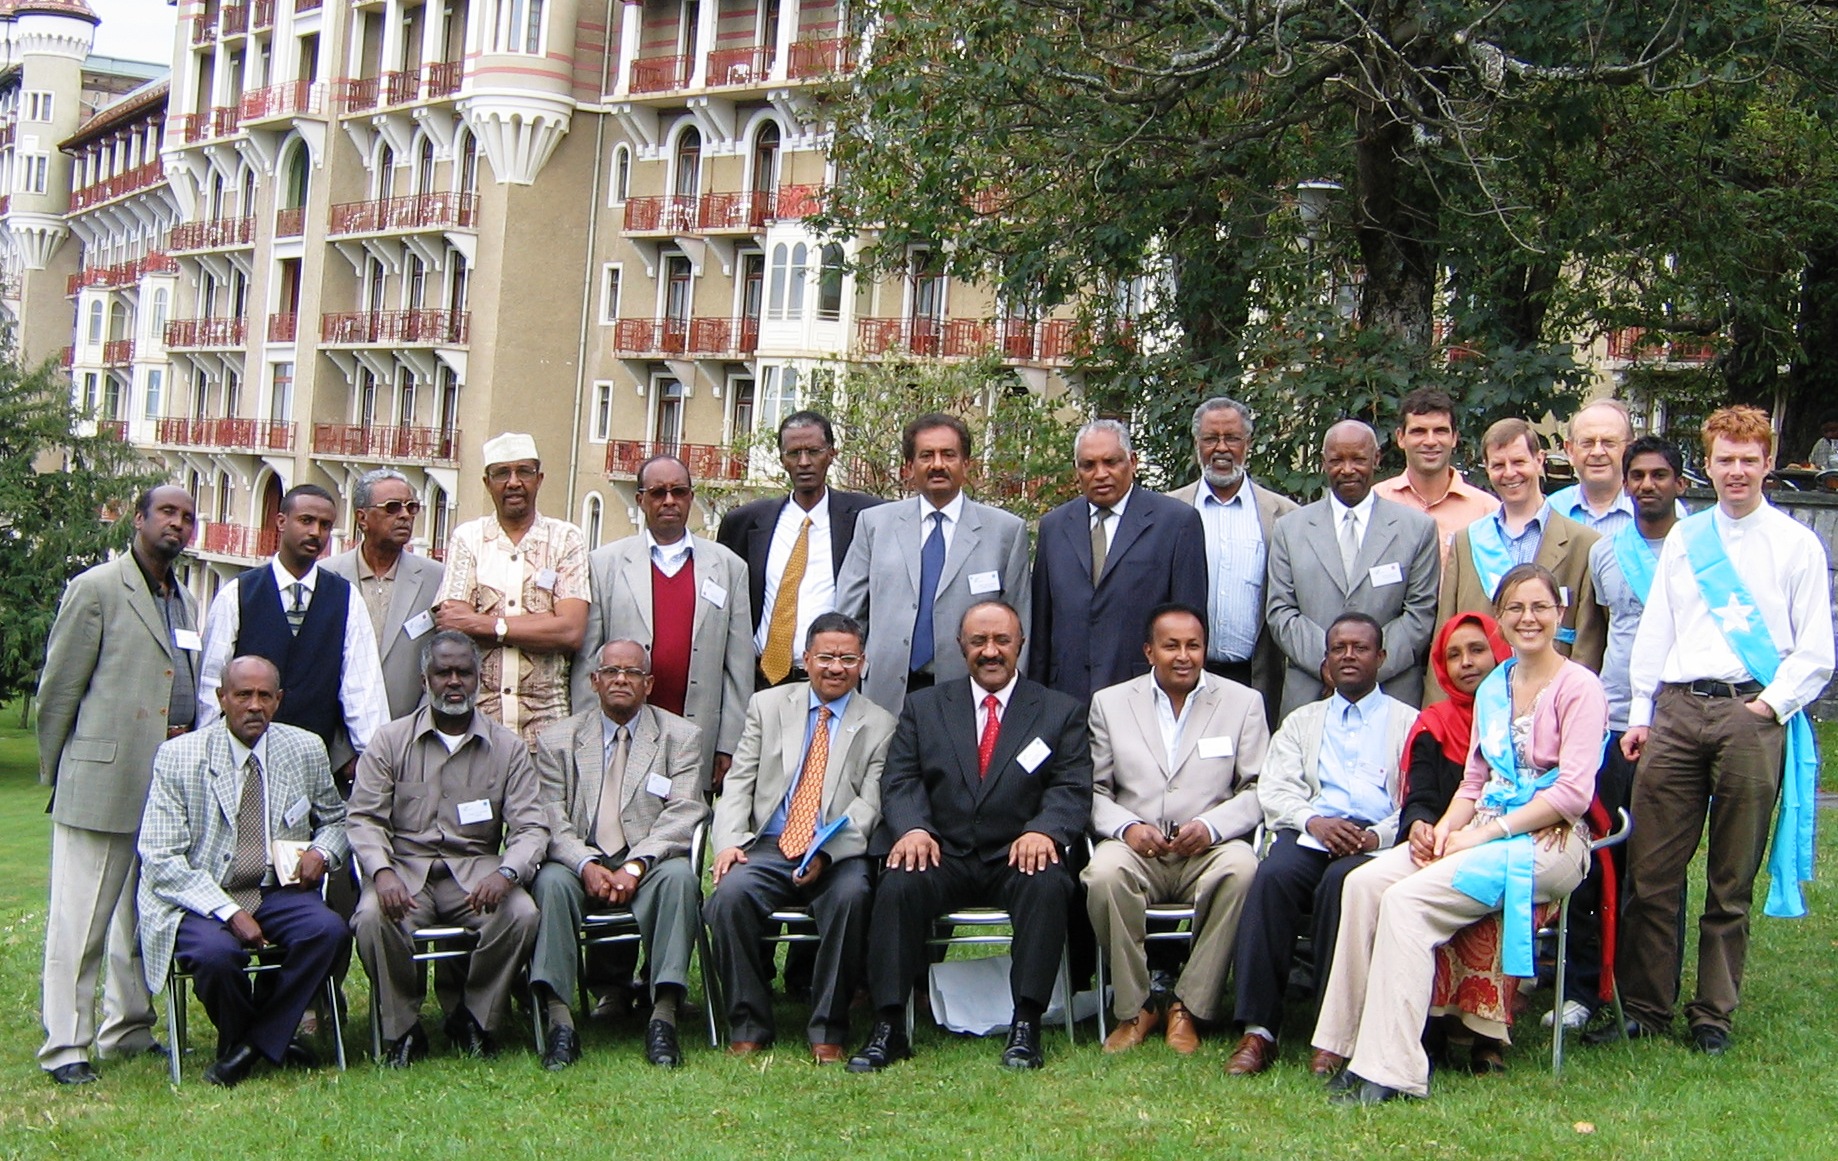 1	Somali delegation at Caux in August 2005 – back row: Omar Salad Elmi (fifth from left), Mohamed Abukar Haji Omar (eighth from right), Osman Jama Ali (sixth from right); Front row: Dr Ahmed Sharif Abbas (fifth from left)